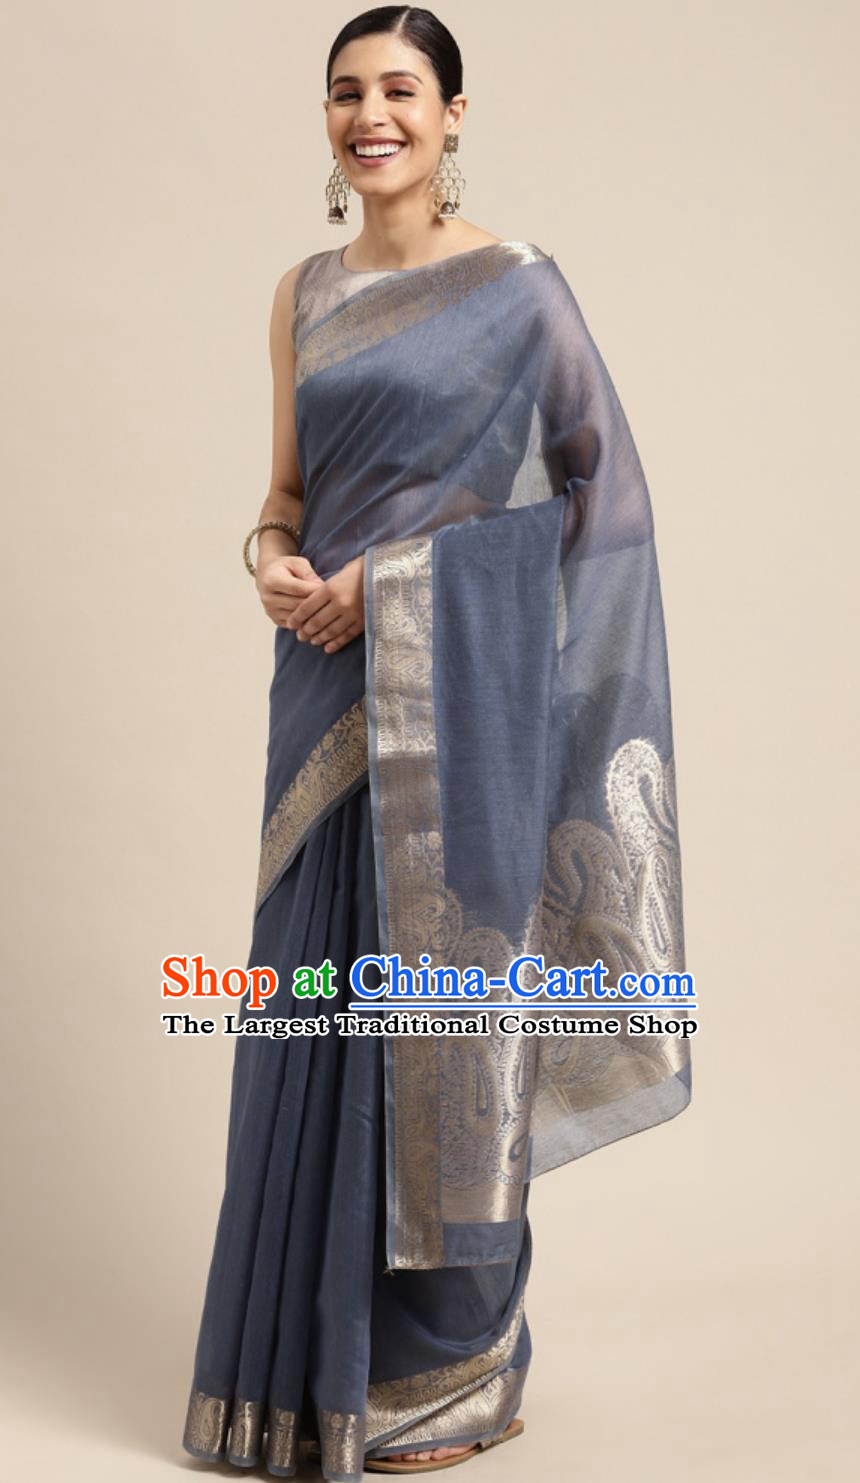 Indian National Clothing Traditional Festival Dusty Blue Sari Dress India Woman Costume